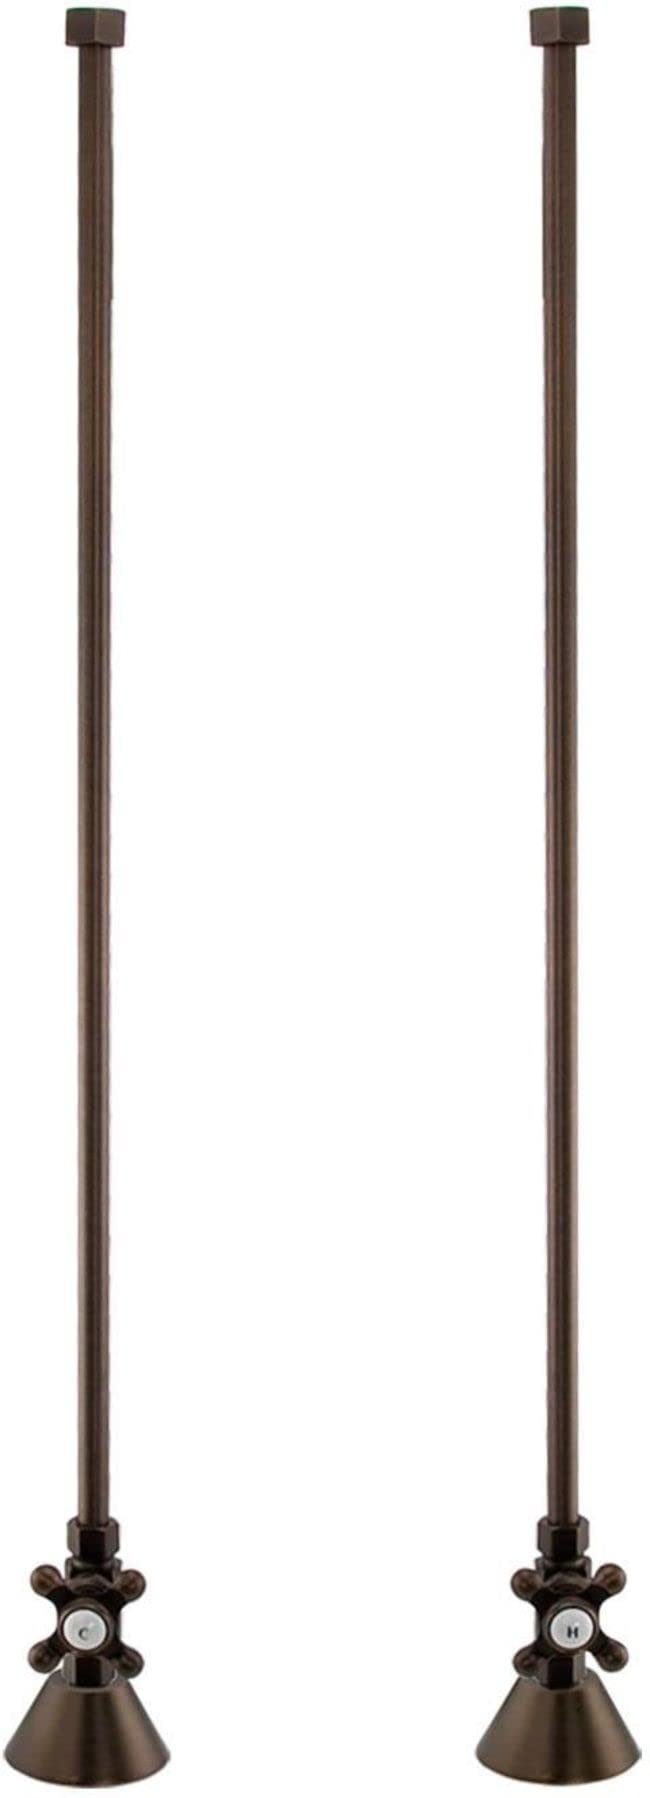 Signature Hardware 139885 Deck Mount Tub Supply Lines with Cross Handle Stops - for Copper Pipe